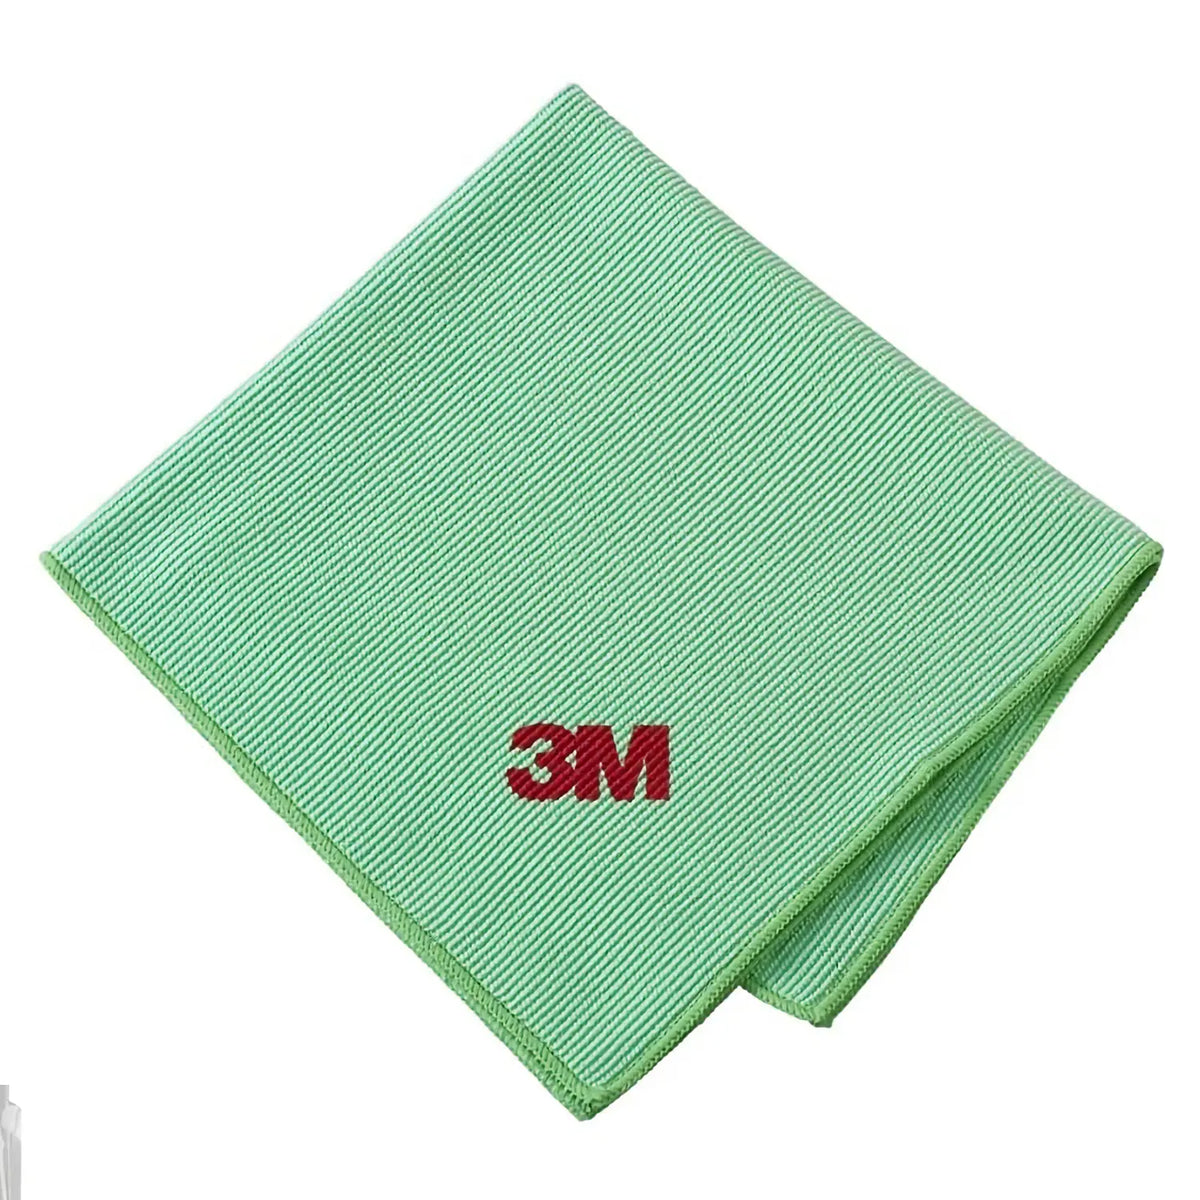 Buy Scotch Brite Green Kitchen Scouring Pad, Large Online at Best Price in  Pakistan 